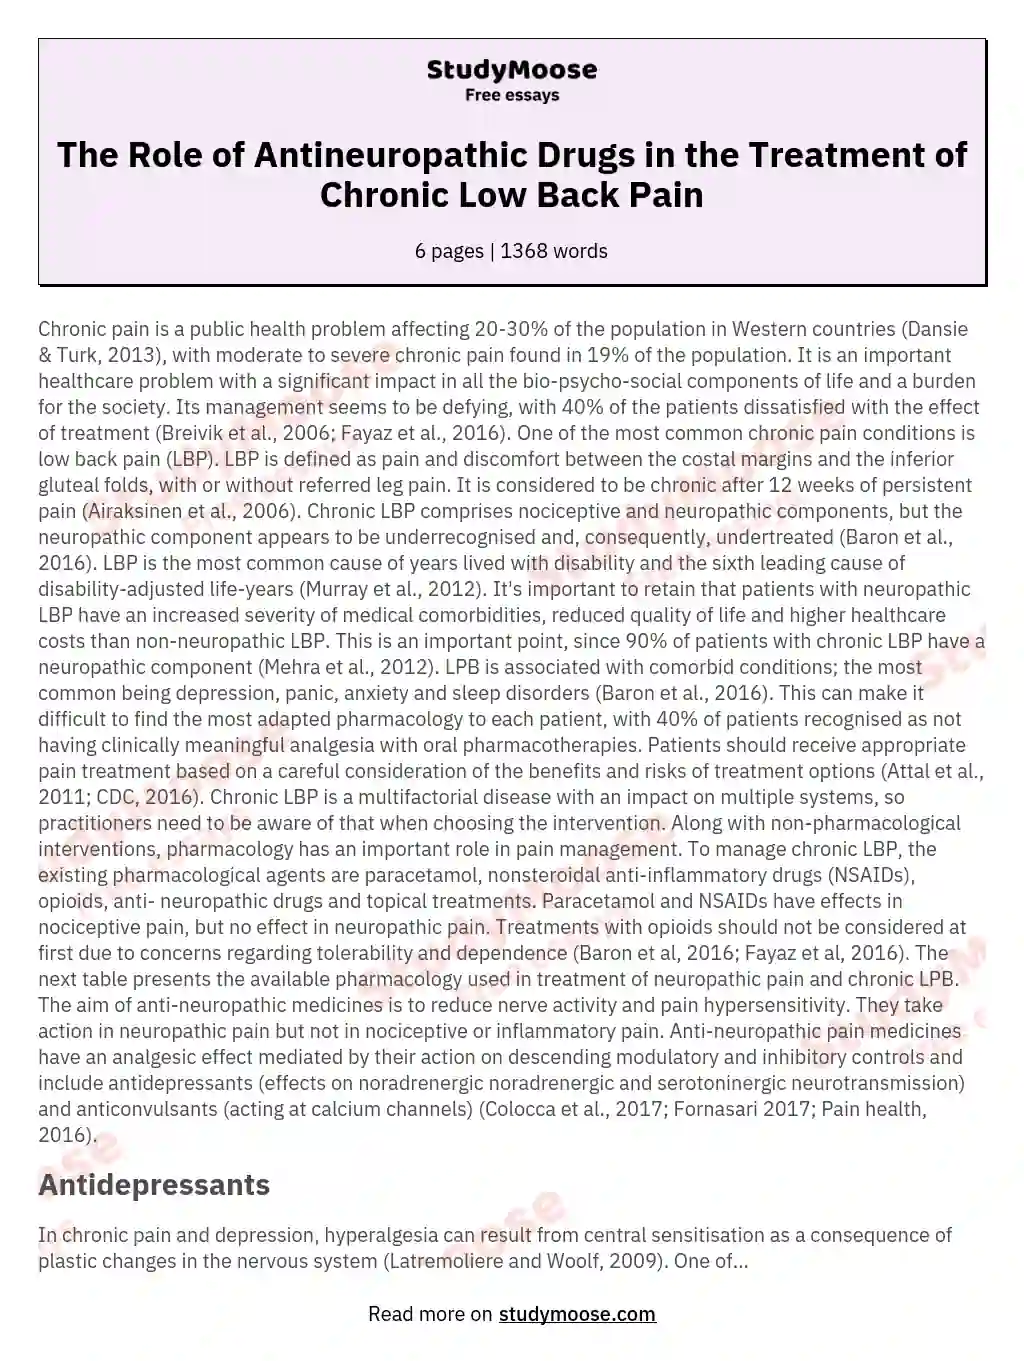 The Role of Antineuropathic Drugs in the Treatment of Chronic Low Back Pain essay